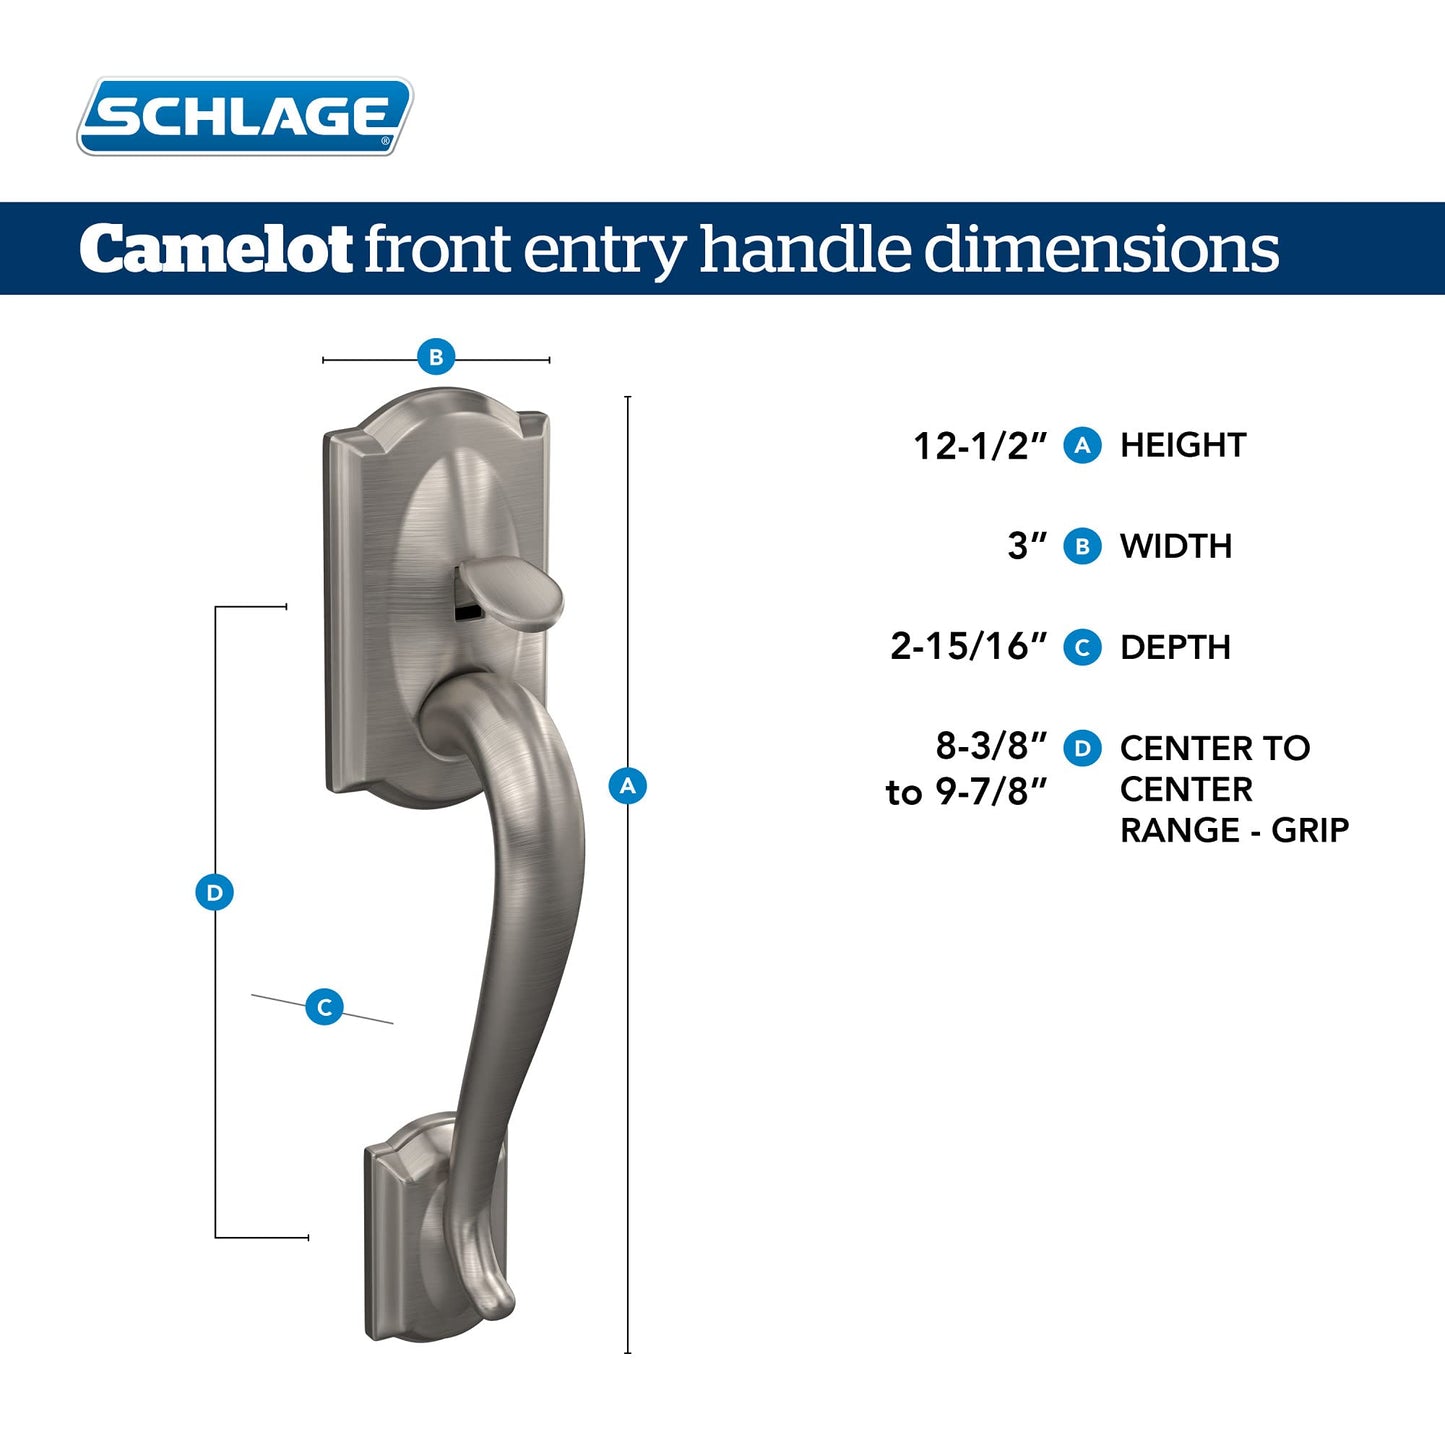 SCHLAGE FE285 CAM 622 Acc RH Camelot Trim Lower Half Front Entry Handleset with Accent Right Hand Lever, Matte Black